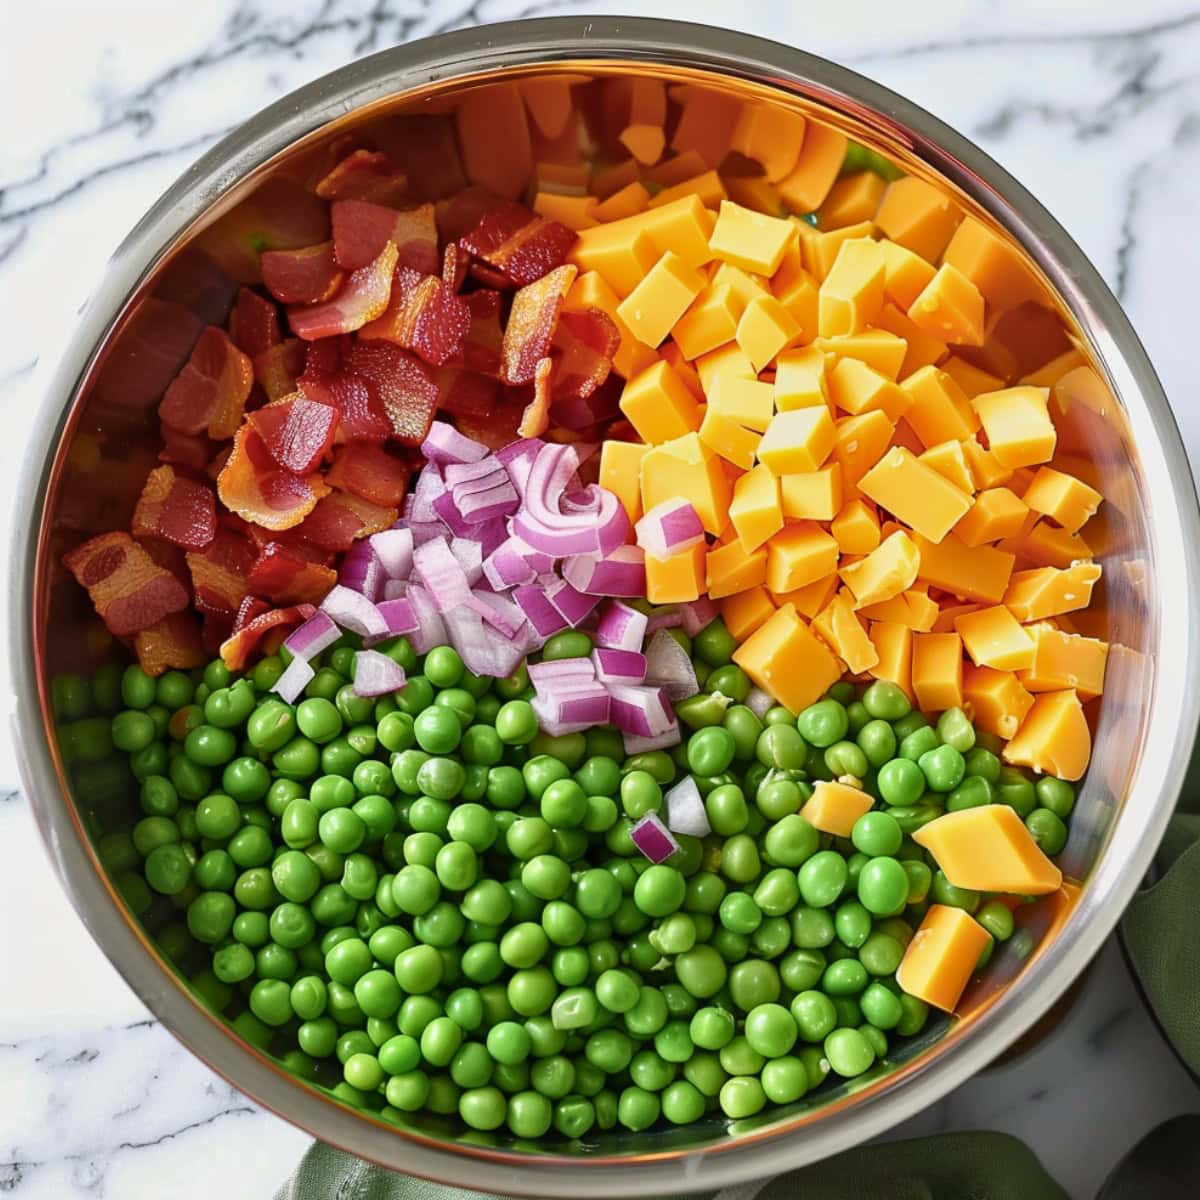 Pea salad ingredients, green peas, cheddar cheese cubes, bacon and red onions in a metal mixing bowl.